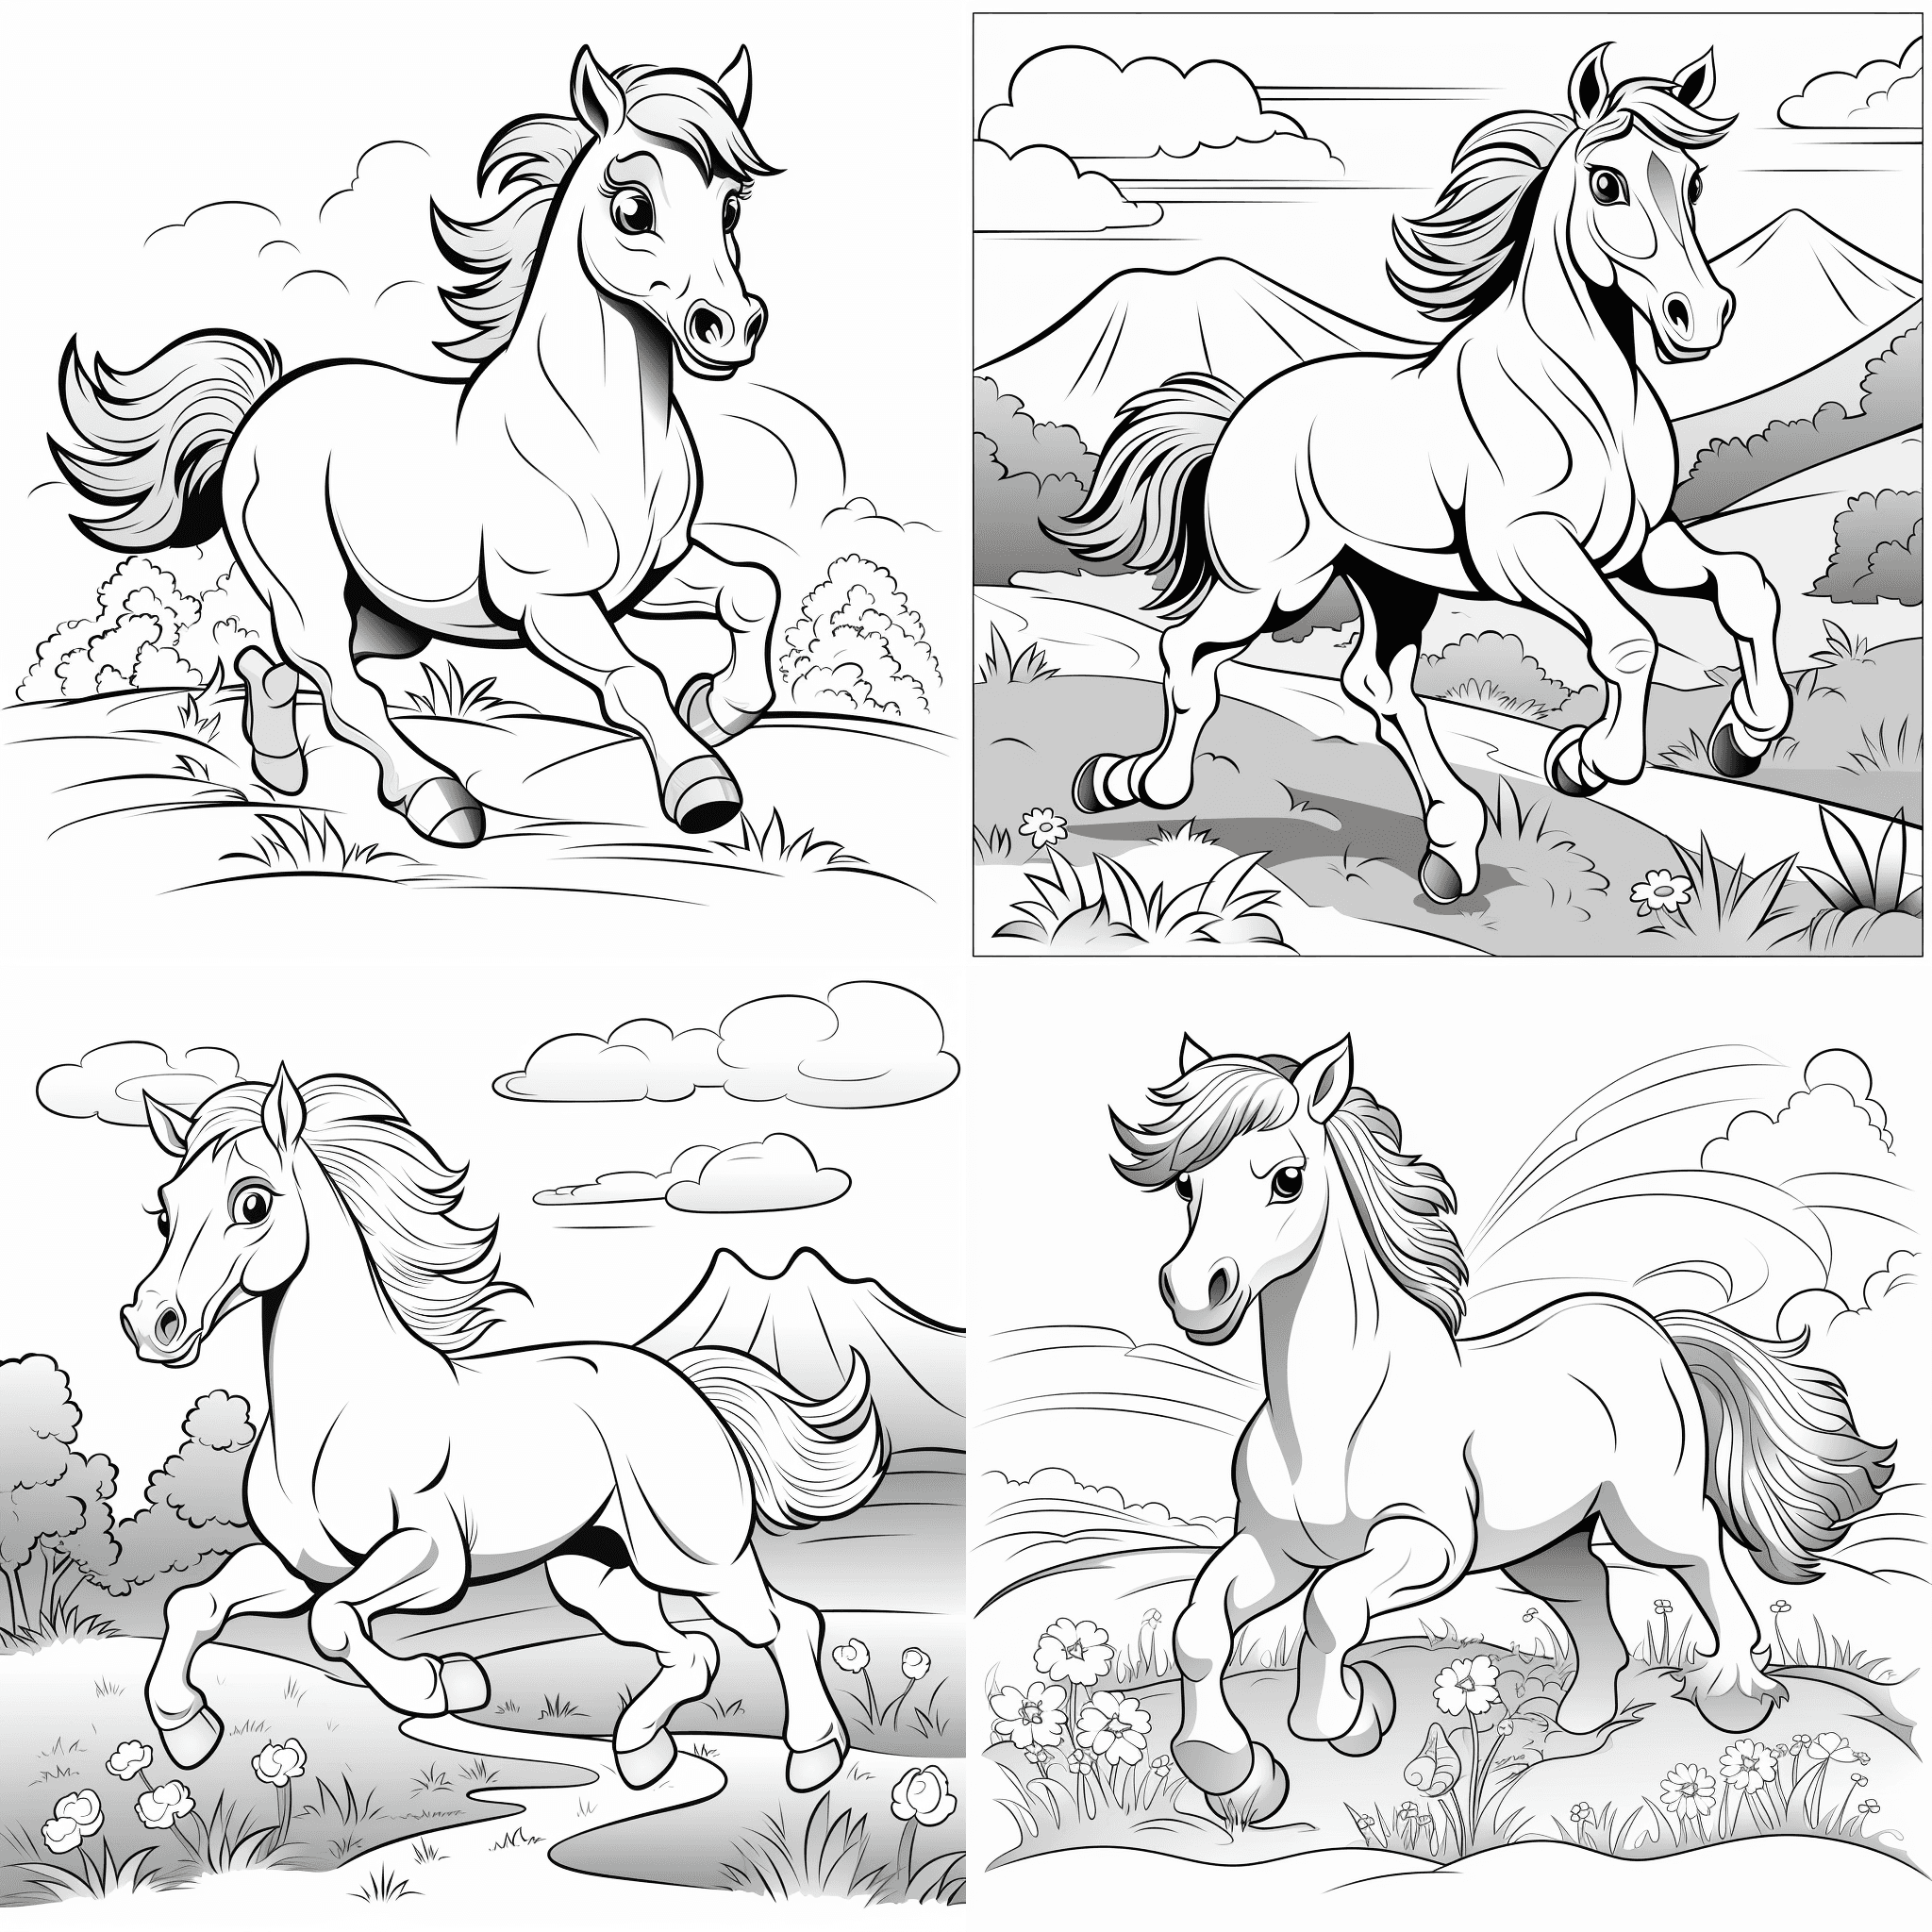 kid's coloring book, a horse is runing, cartoon, thick lines, black and white, white background